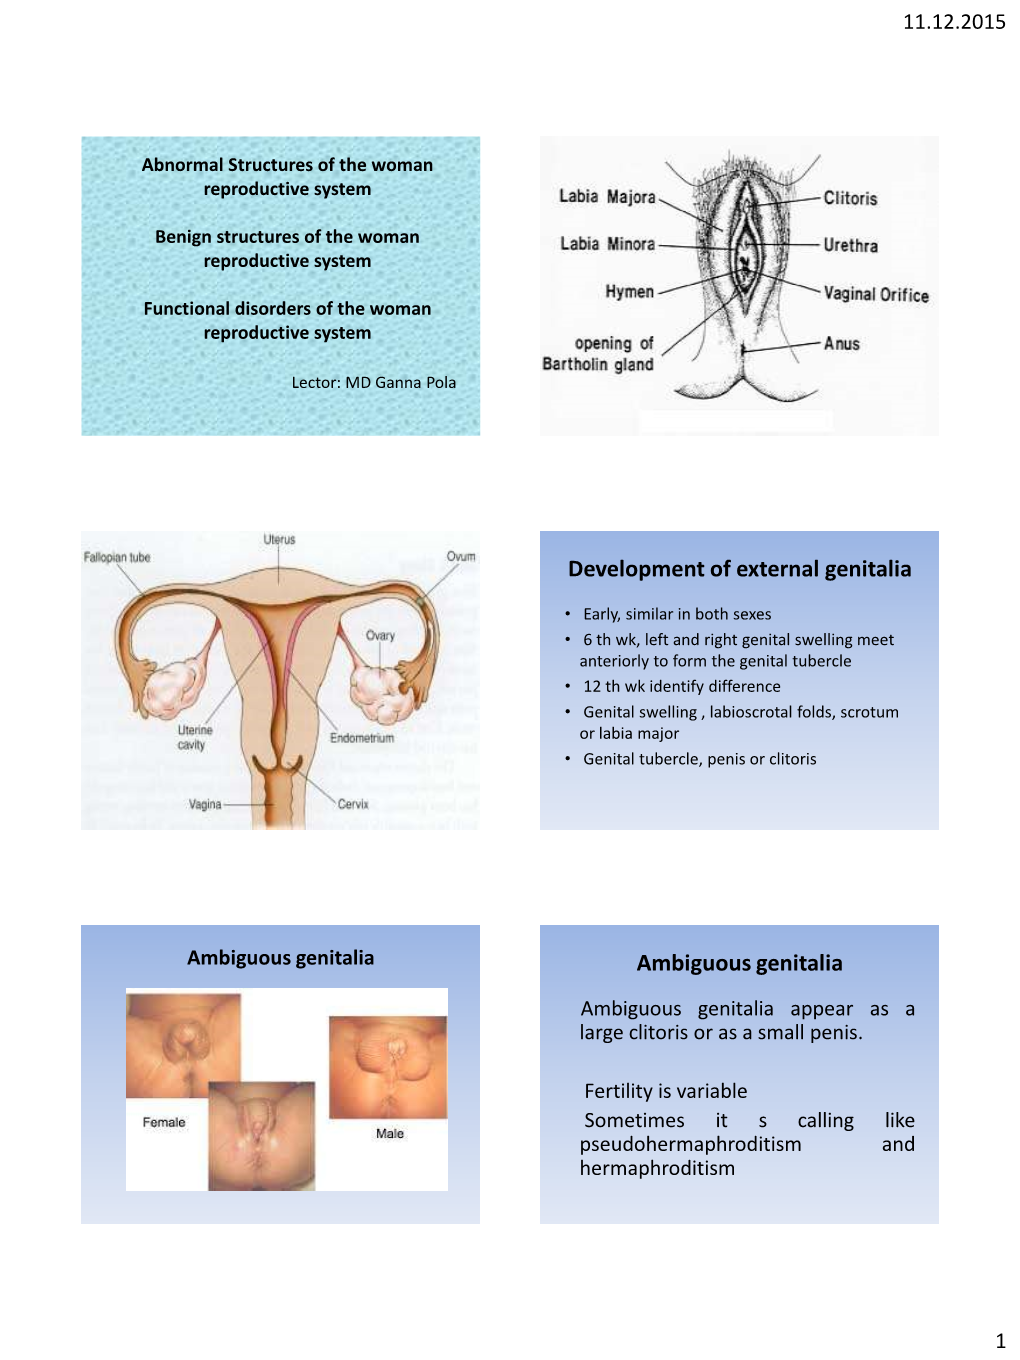 Abnormal Structures of the Woman Reproductive System